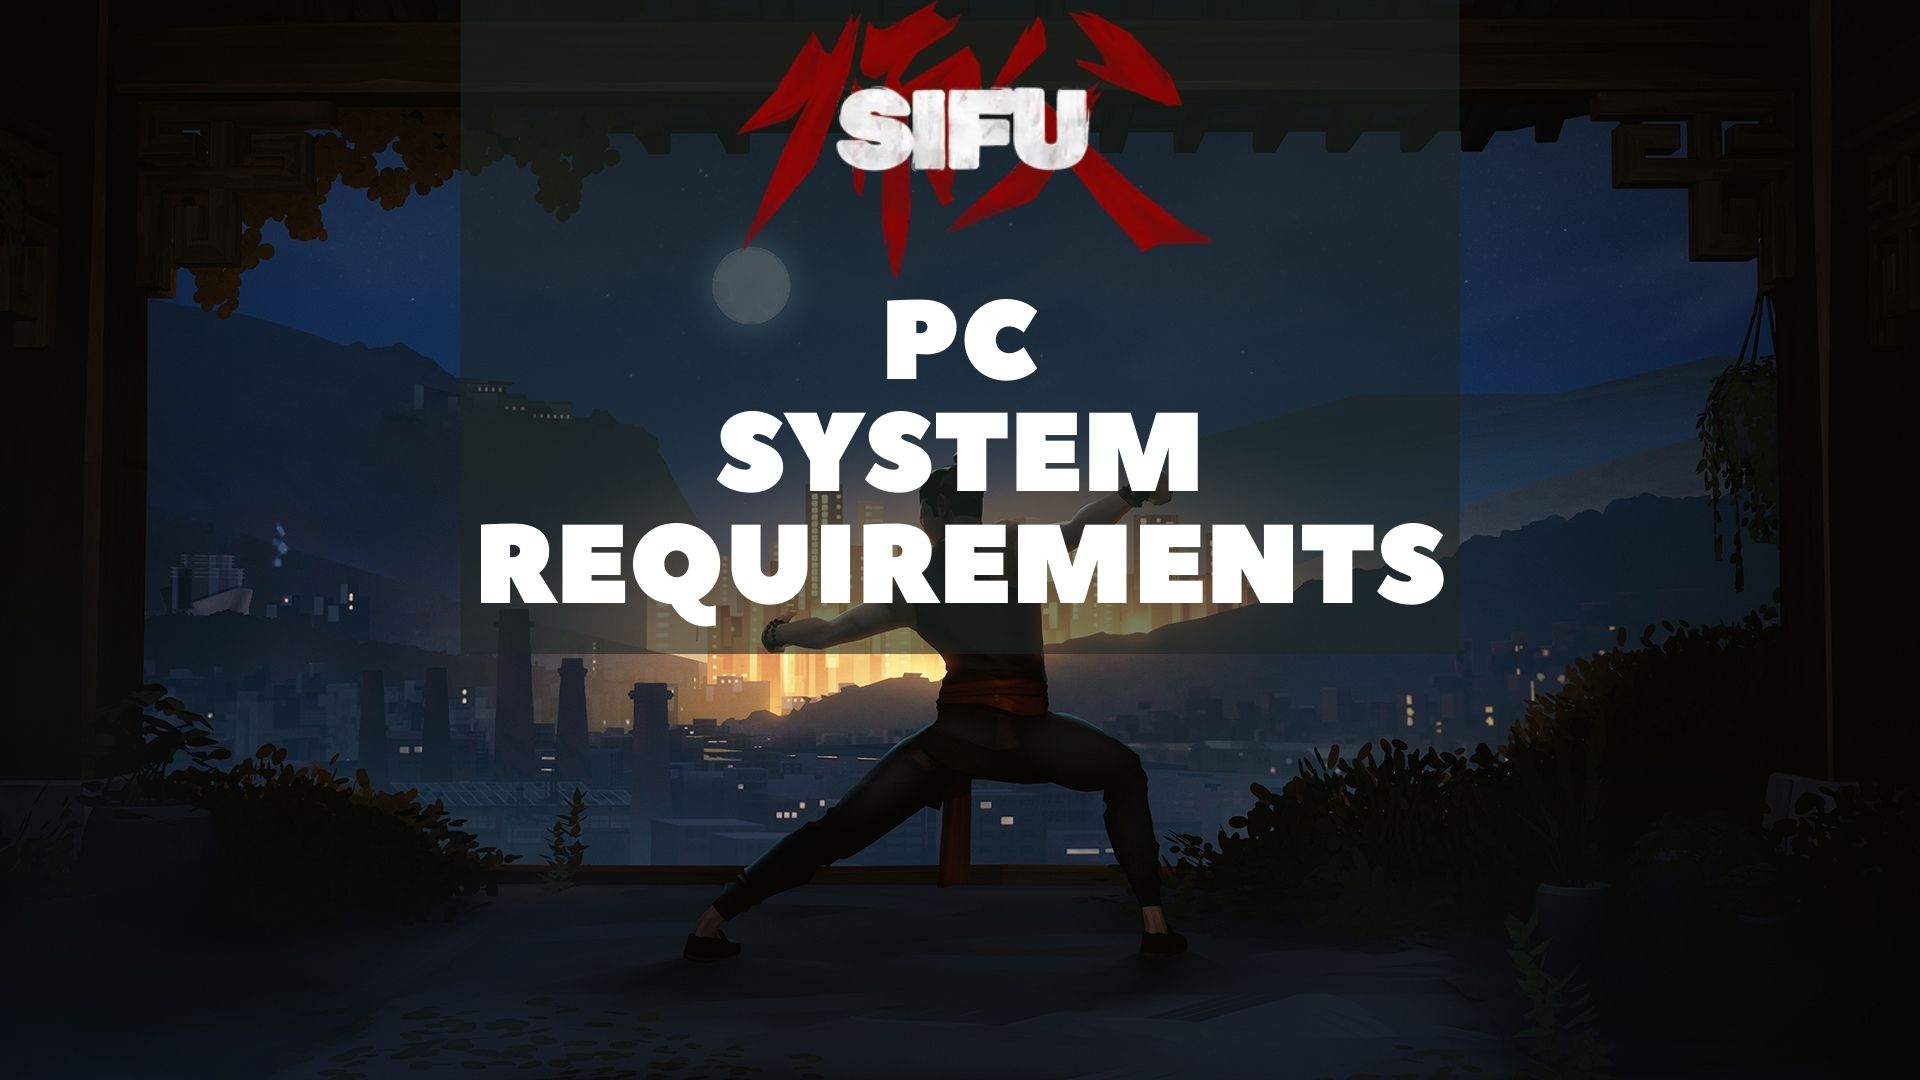 SIFU PC System Requirements